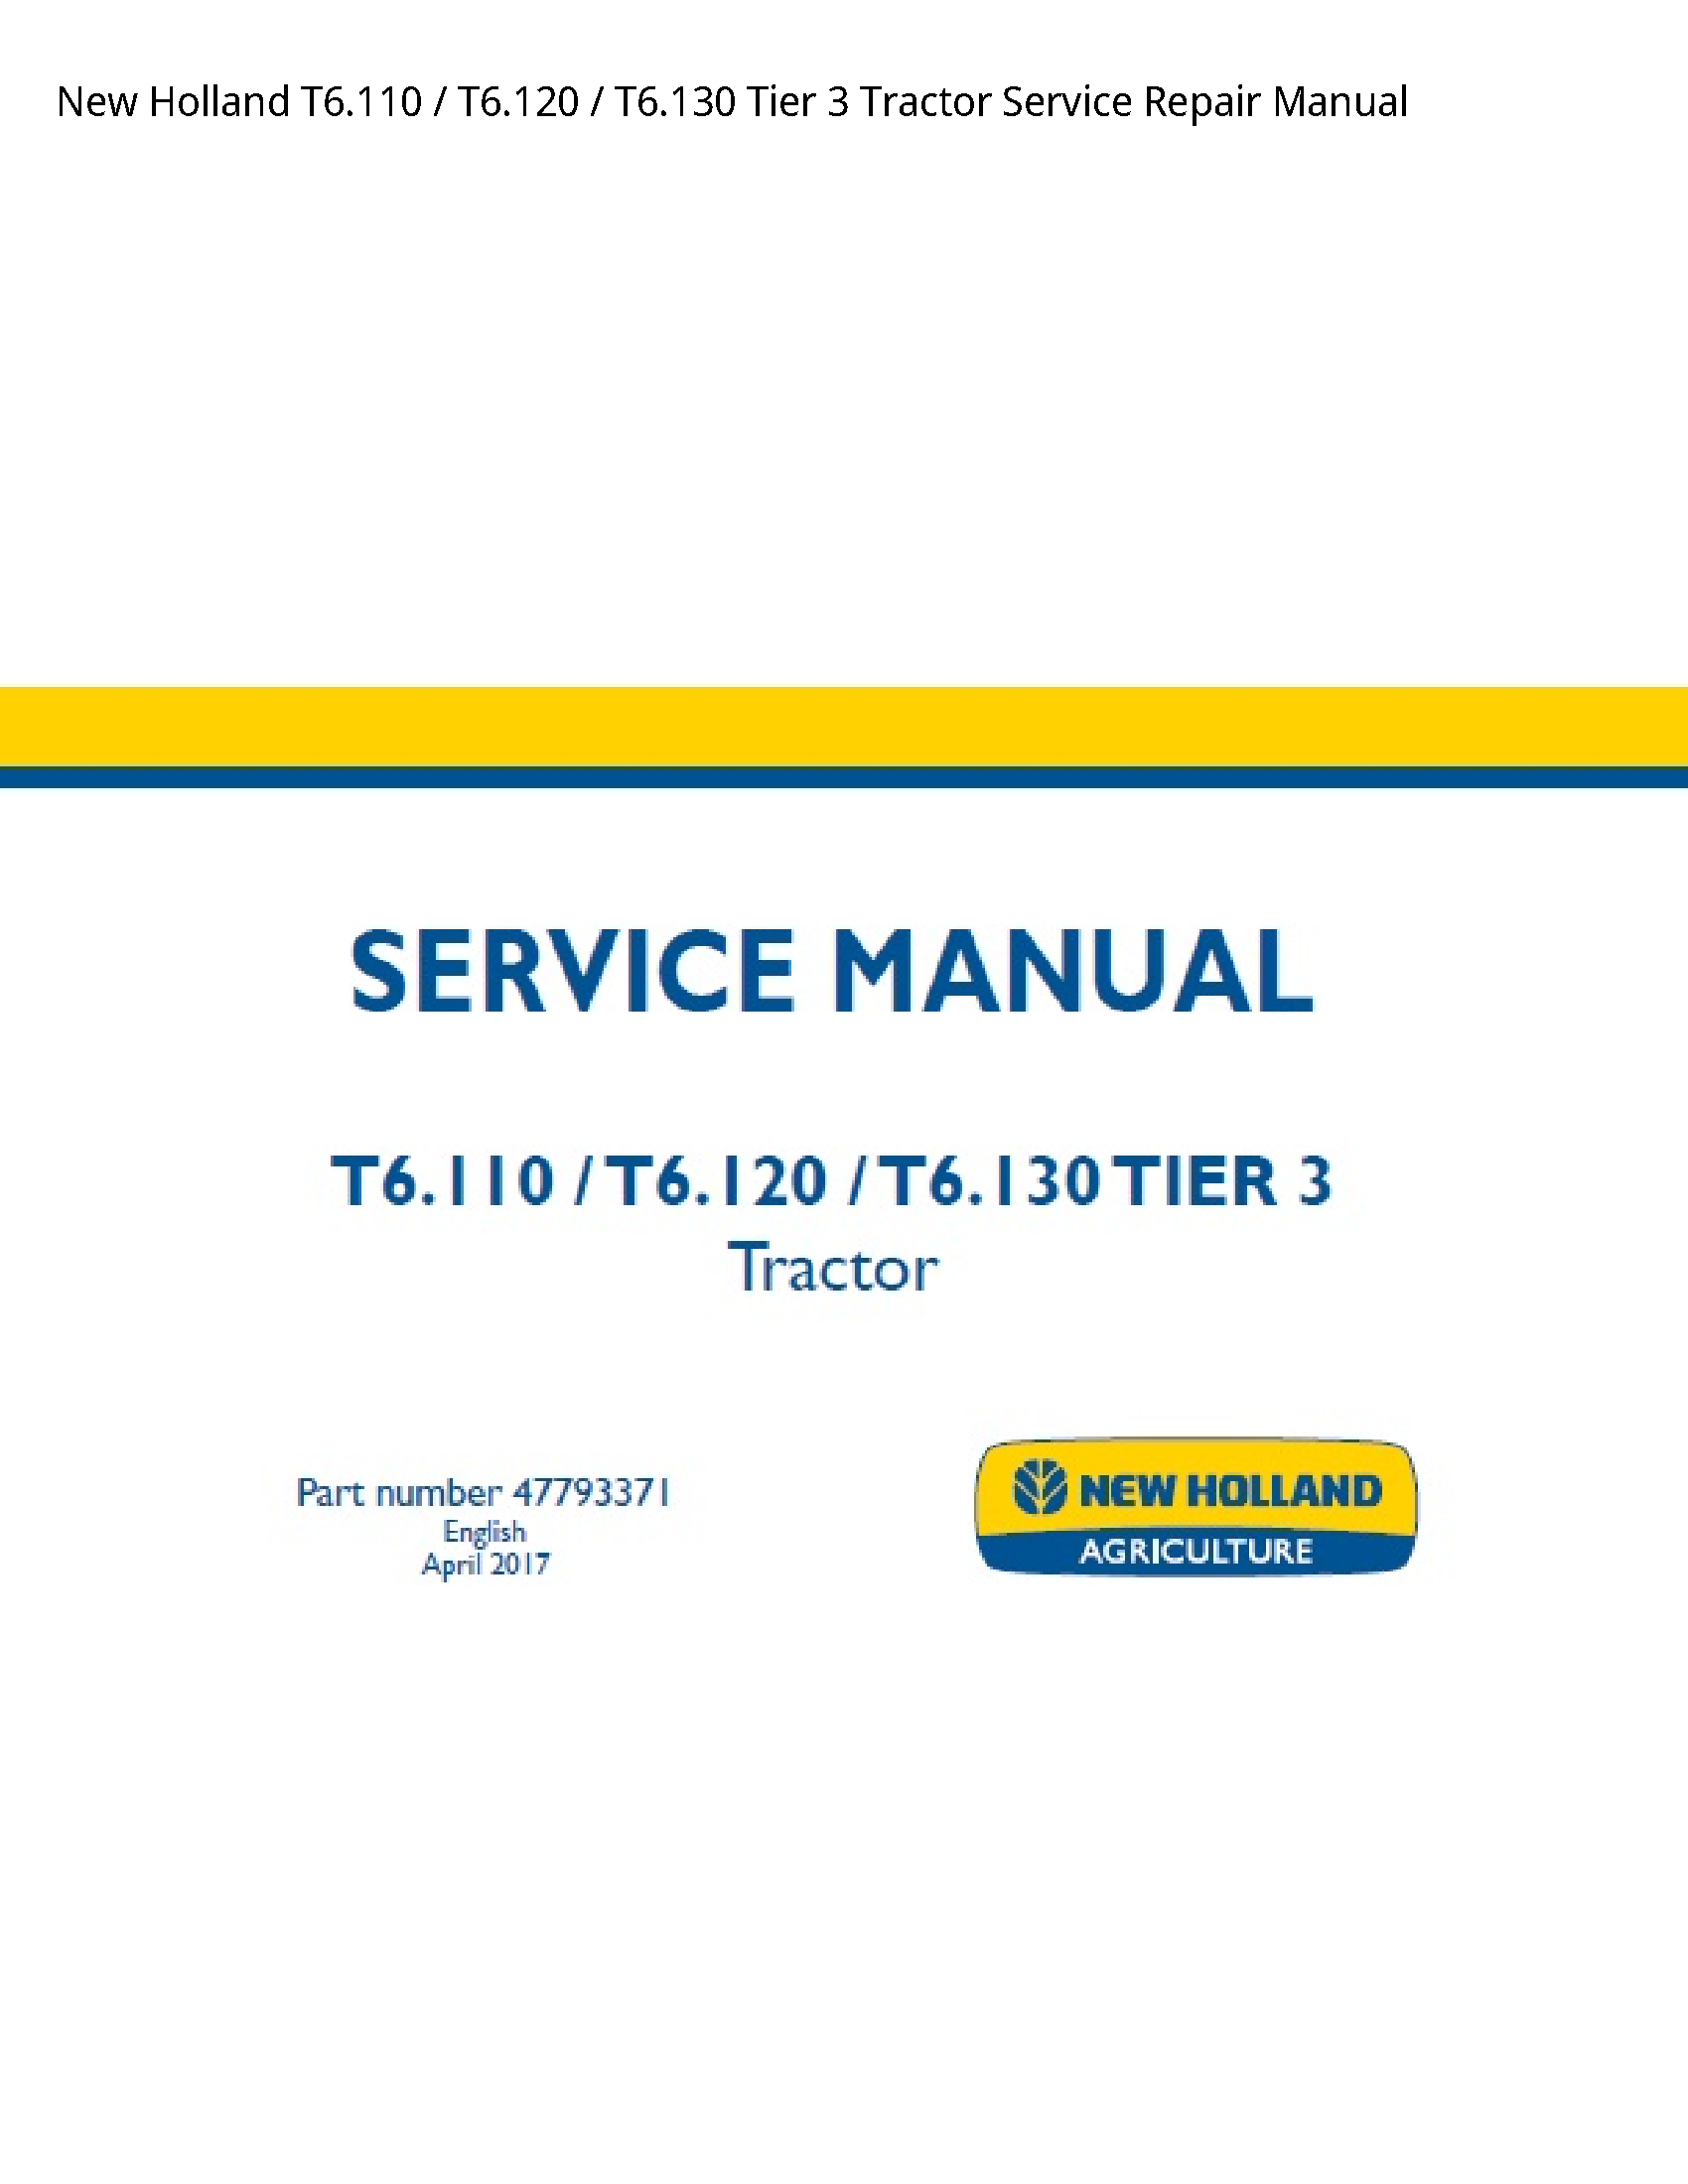 New Holland T6.110 Tier Tractor manual